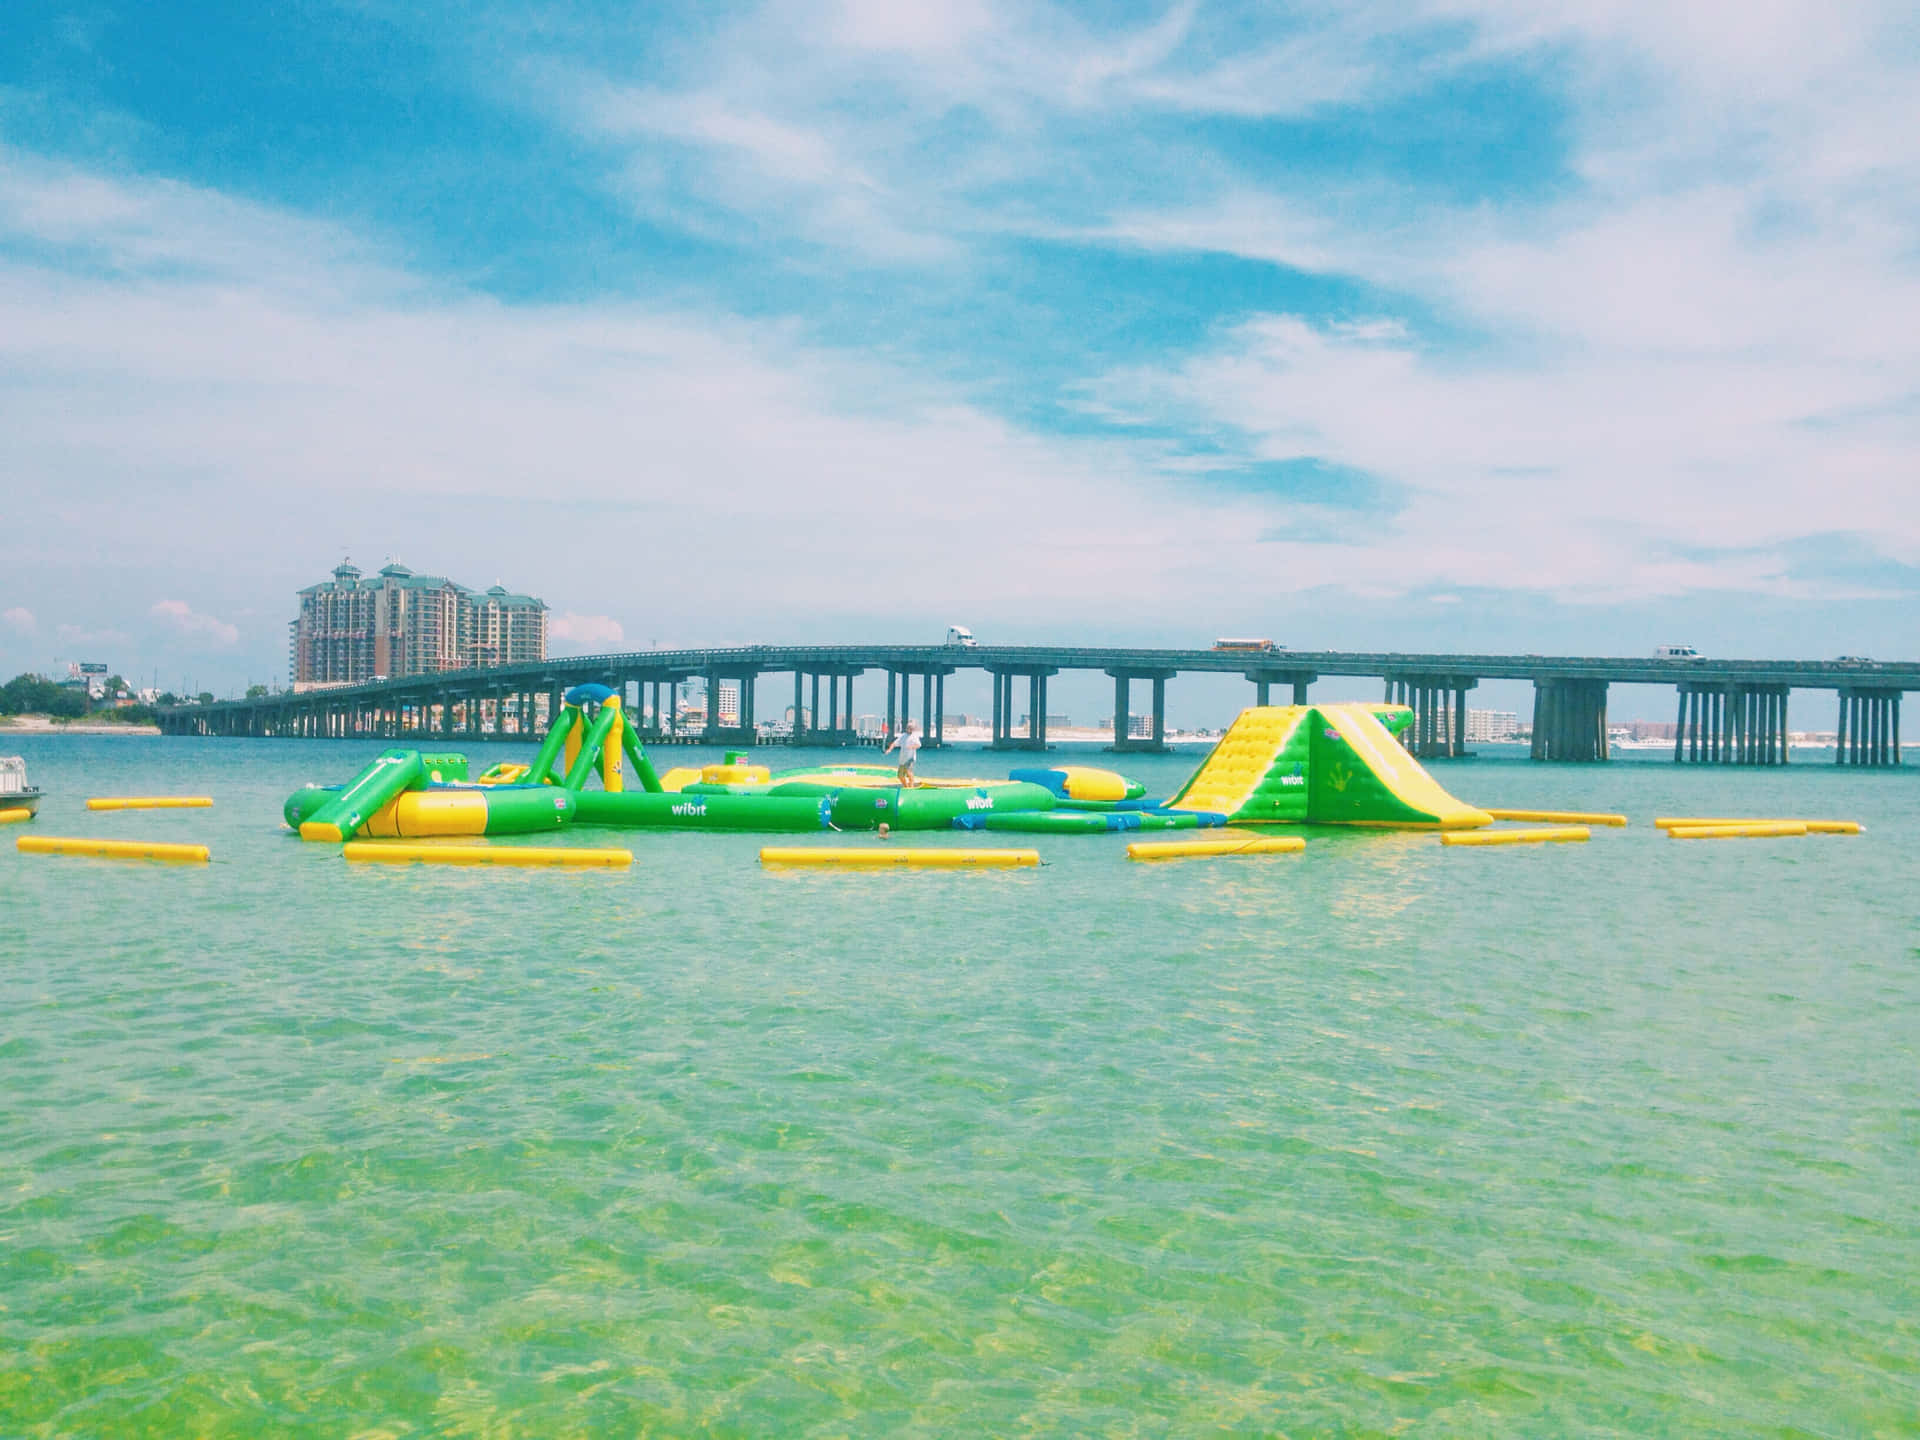 Experience a day of playtime at Crab Island!